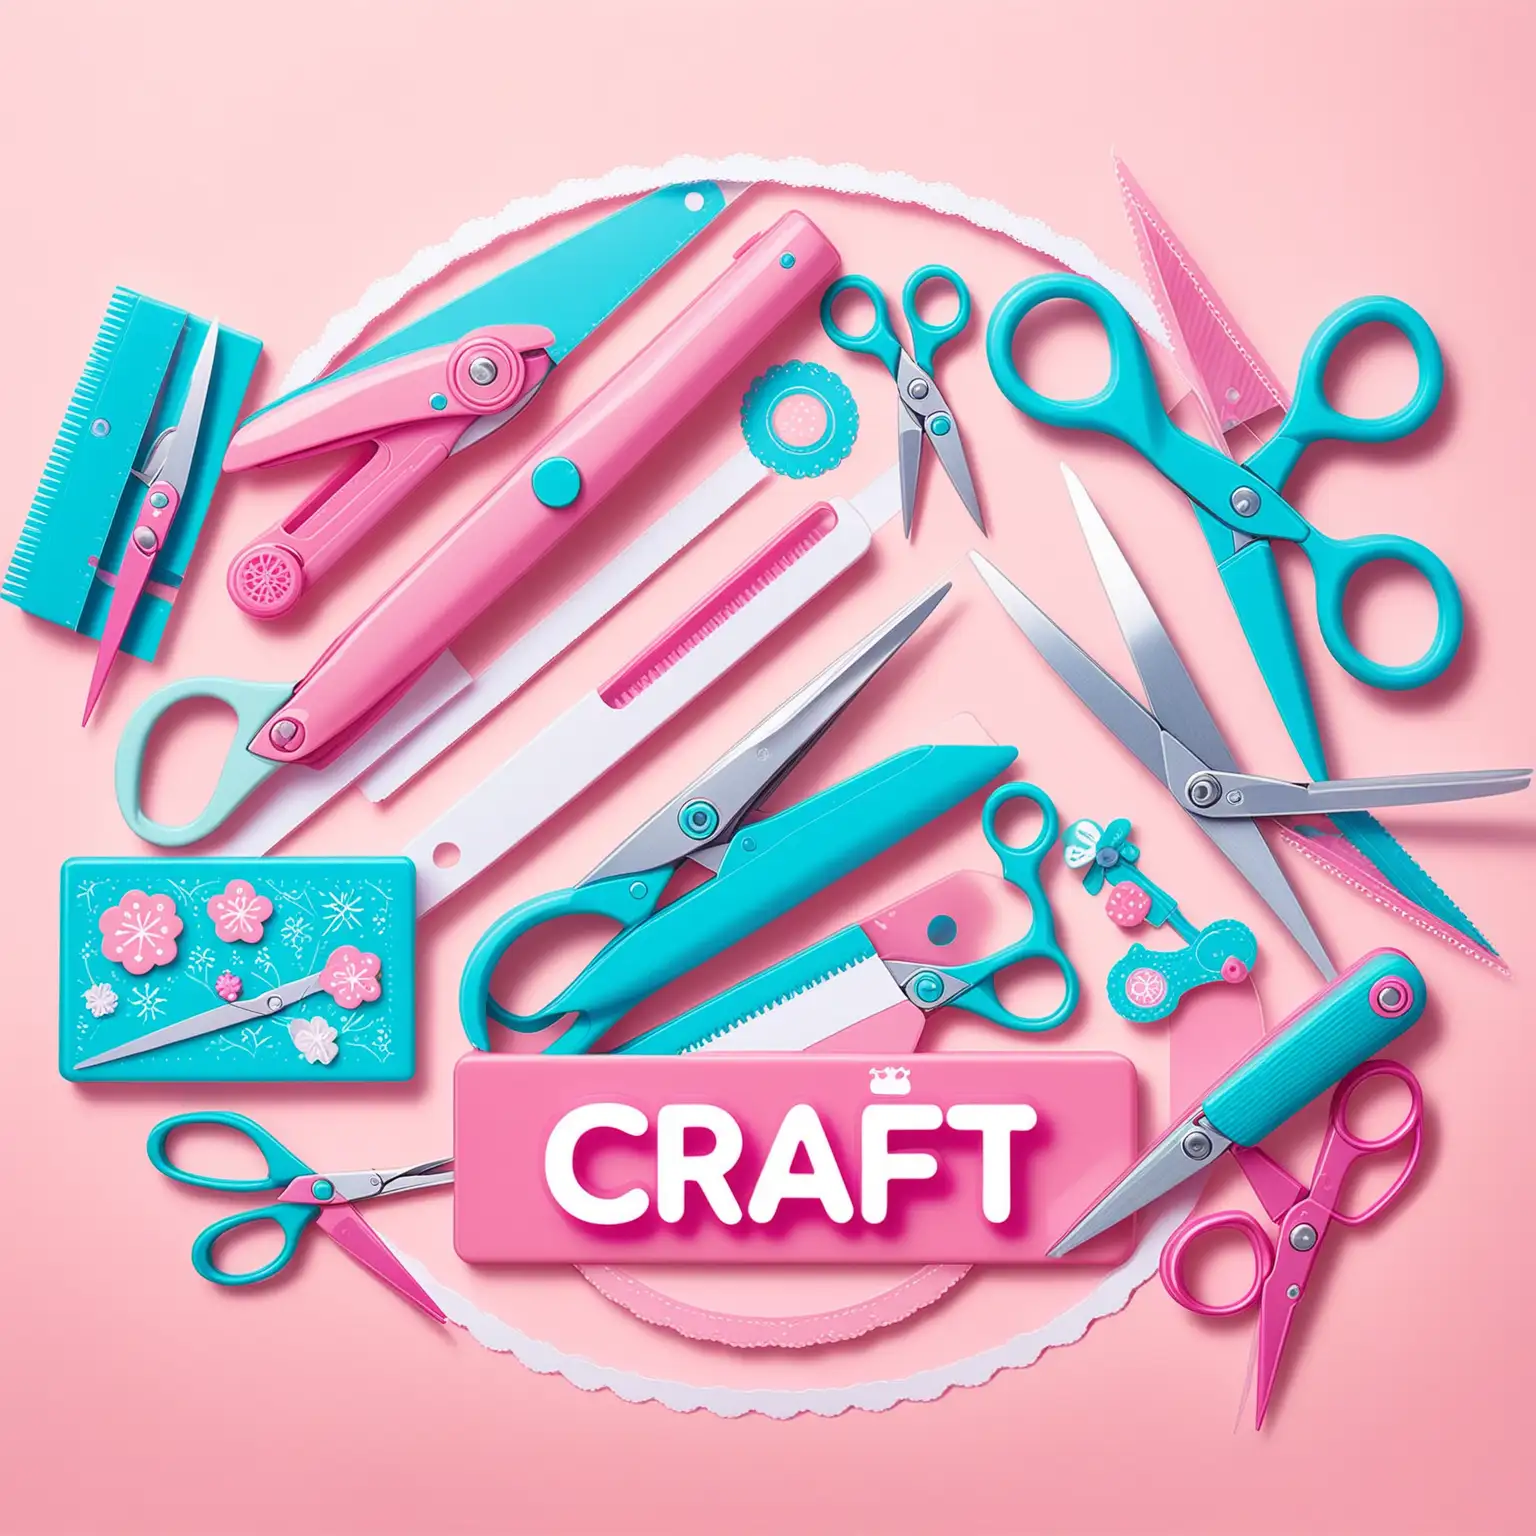 Crafting Woman with Scissors and Cutting Machine in Pink and Blue Design